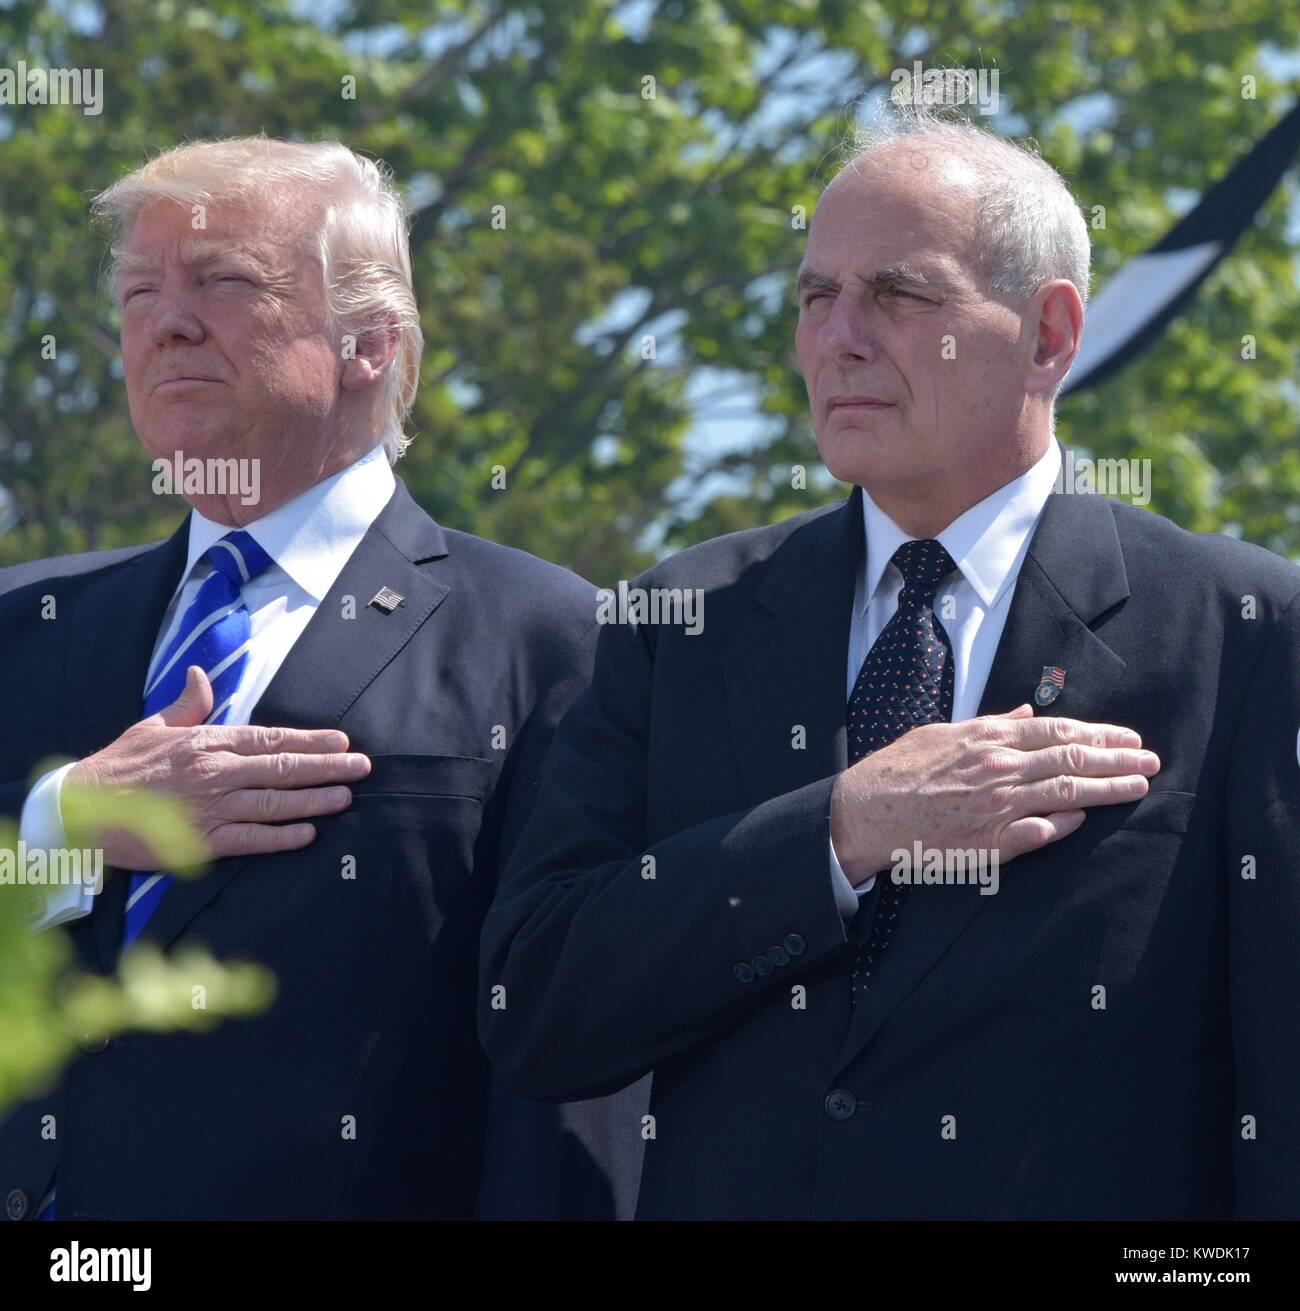 President Donald Trump and Secretary of Homeland Security John Kelly, May 17, 2017. Trump delivered the commencement address at the Coast Guard Academy Commencement, New London, CT (BSLOC 2017 18 143) Stock Photo